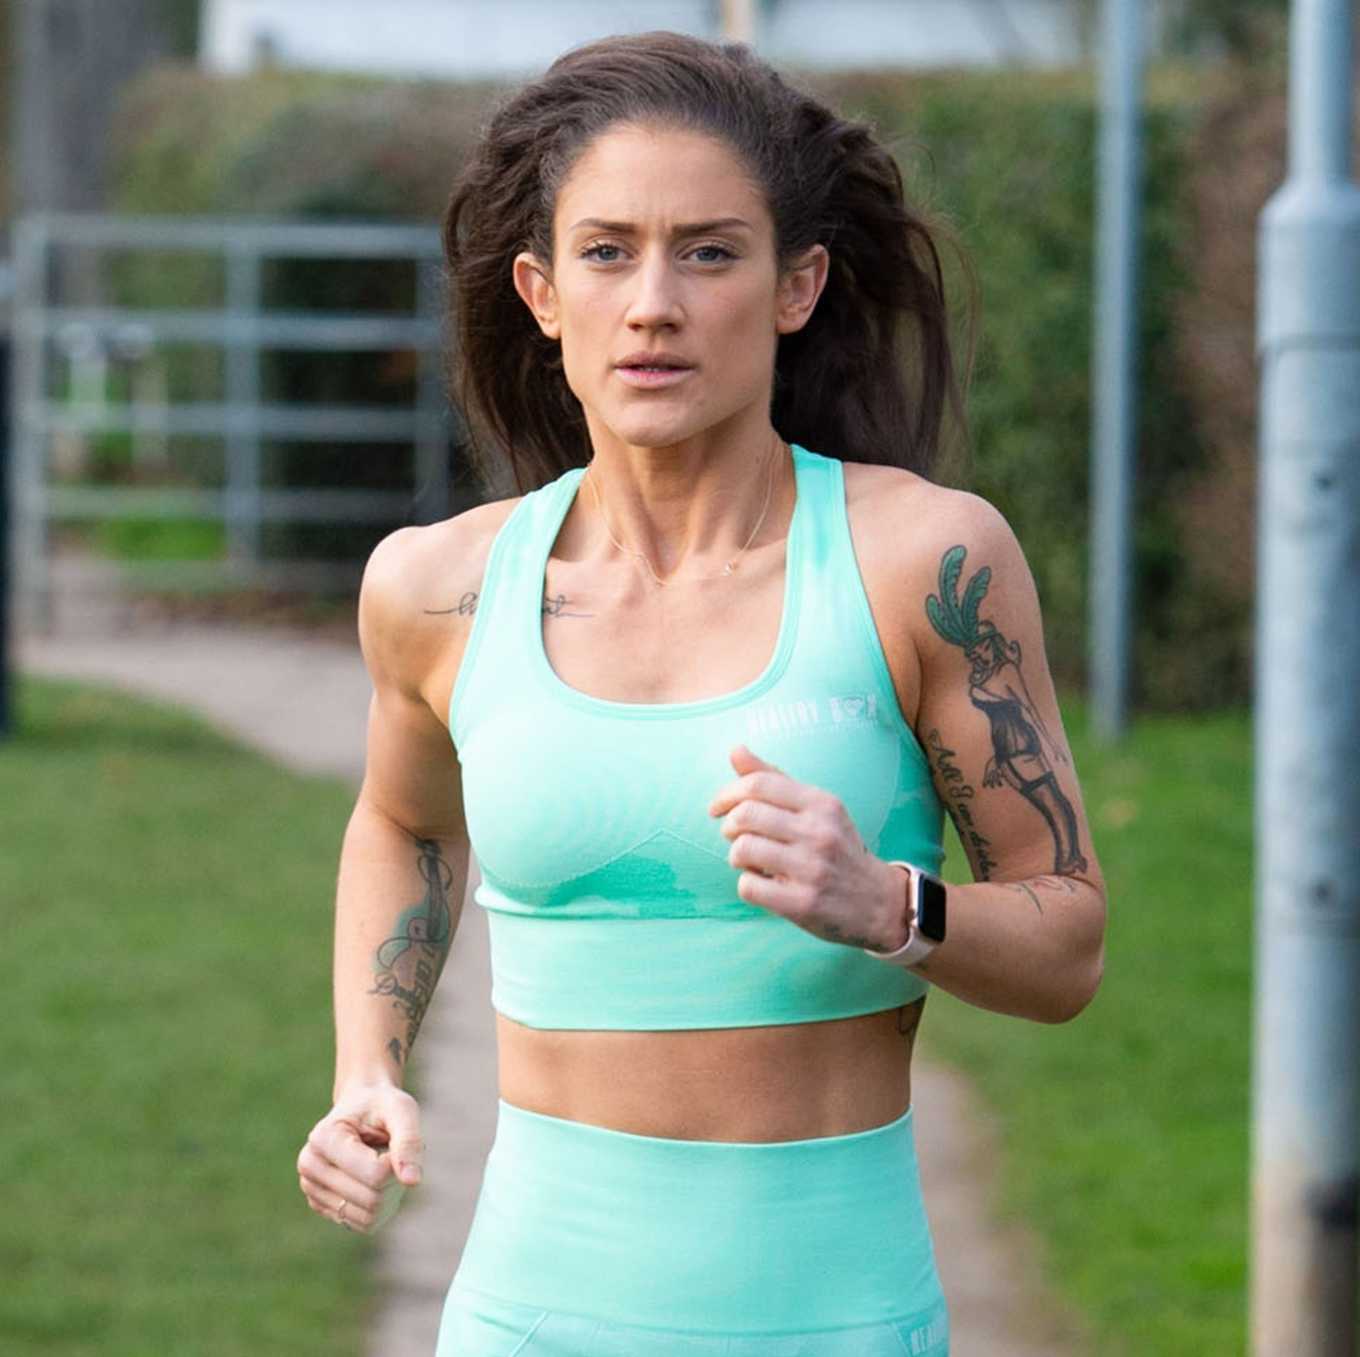 Katie Waissel â€“ Working out at her local park in North London